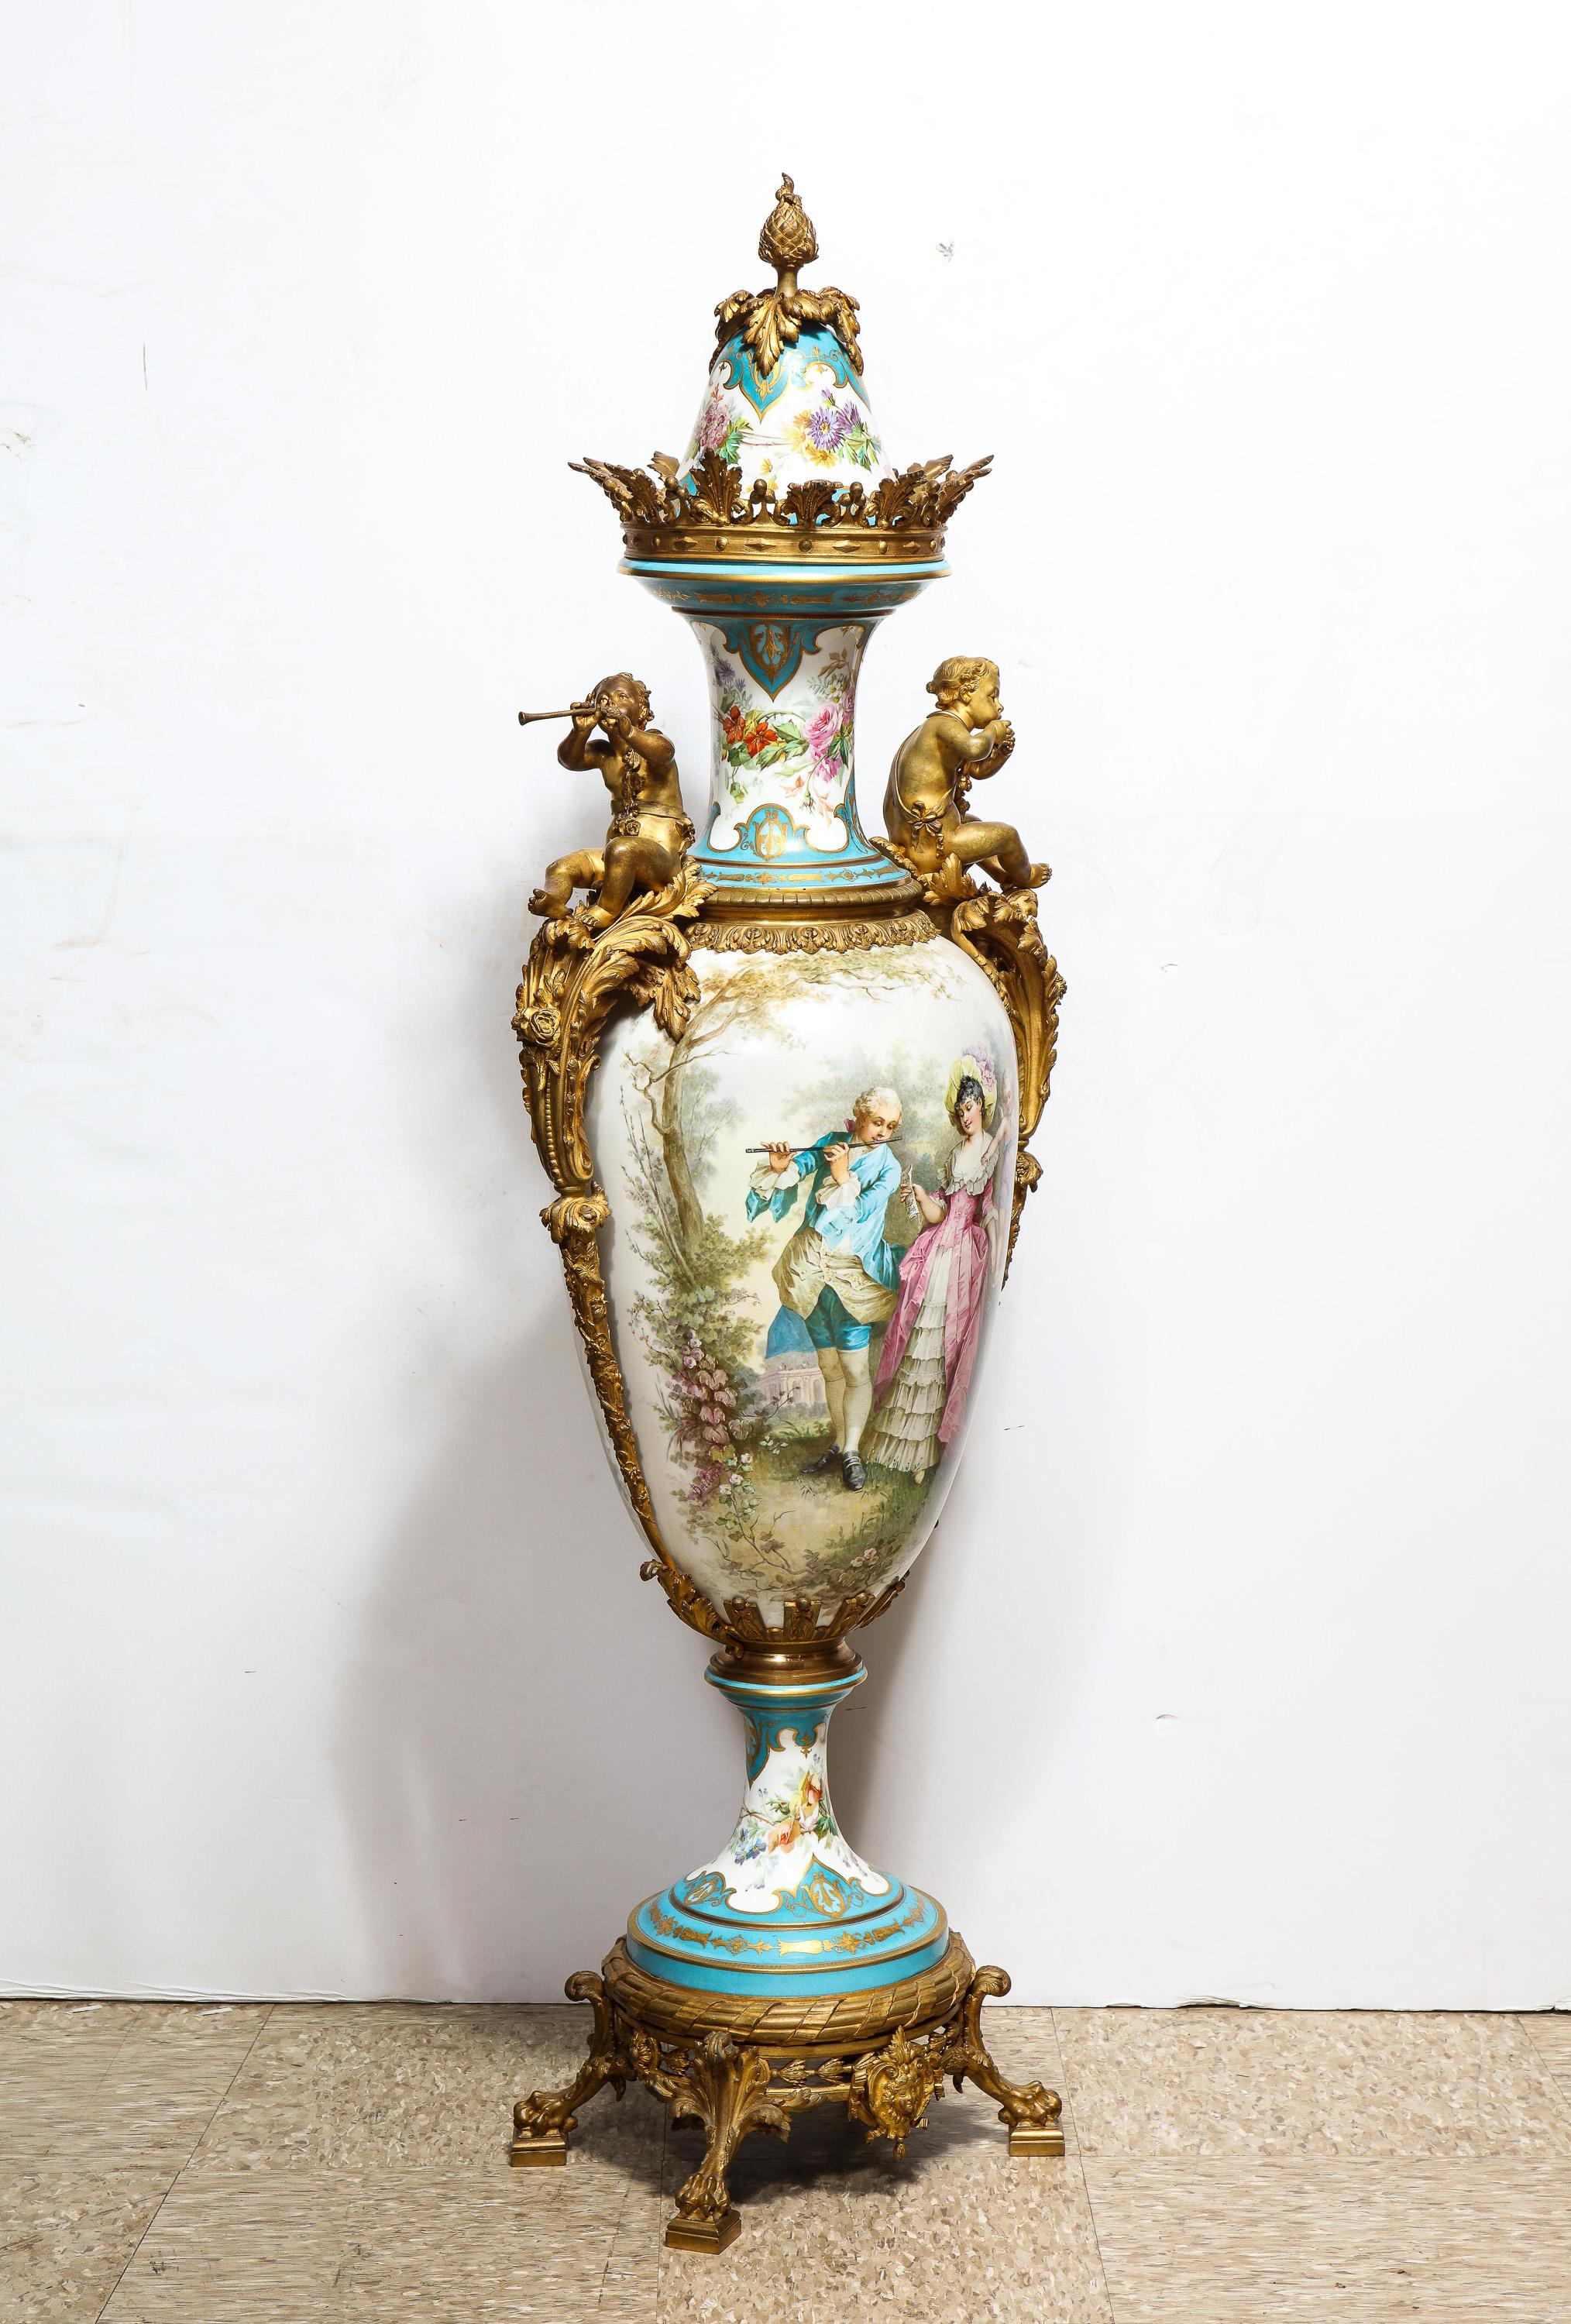 A palatial french ormolu-mounted Sevres Porcelain hand-painted vase and cover, circa 1838.

This monumental Sevres porcelain vase stands 56